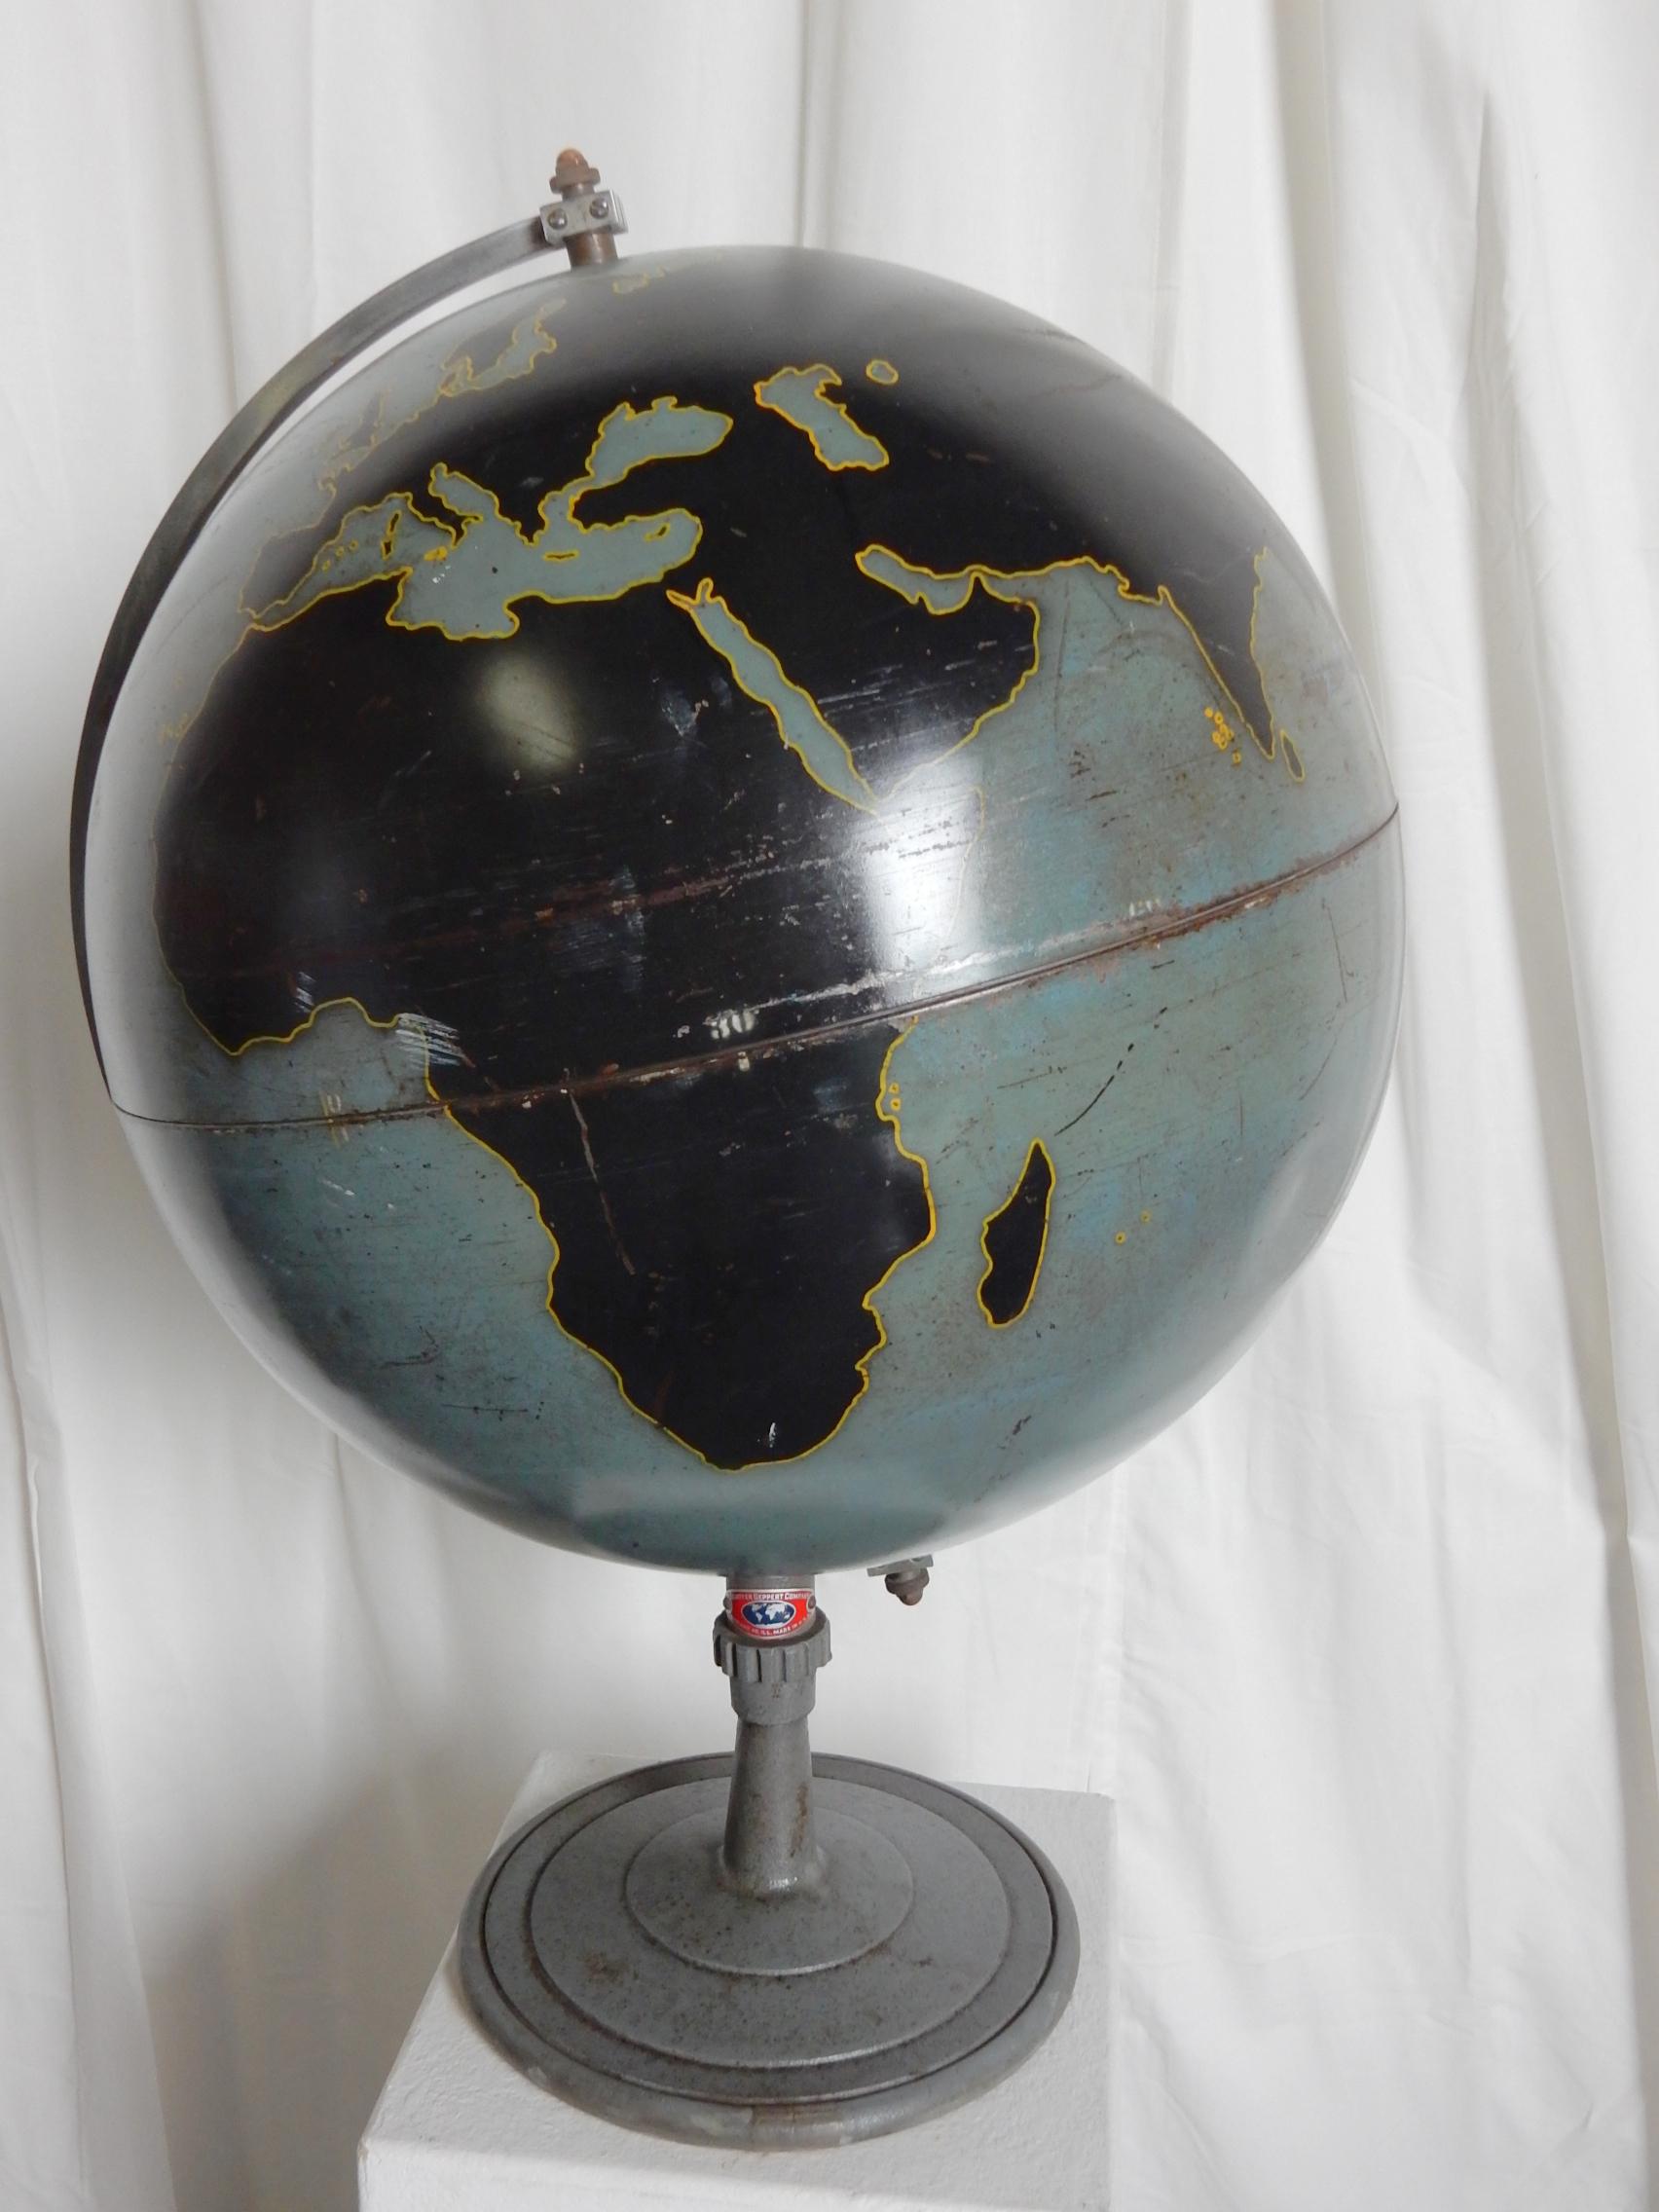 20 inch Denoyer Geppert of Chicago military world globe.
Made of thick spun metal on a heavy iron stand.
Like a chalkboard, this was an educational instrument.
Completely original paint. Solid condition with no missing or loose parts.
Stands 31